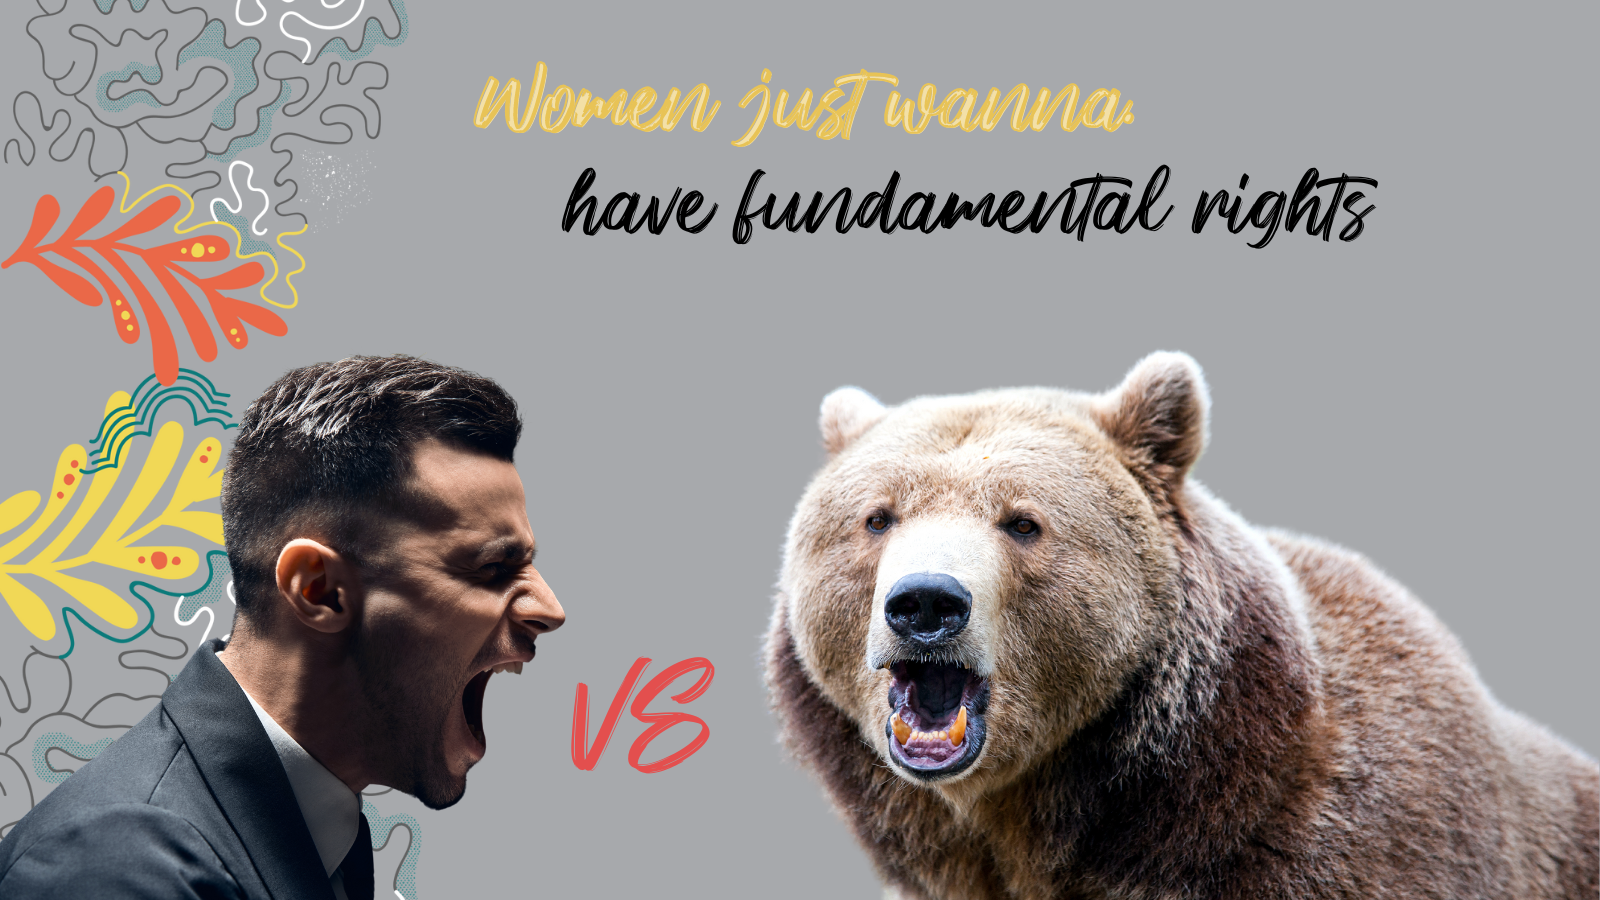 The bear, the misogynist, and the feminist